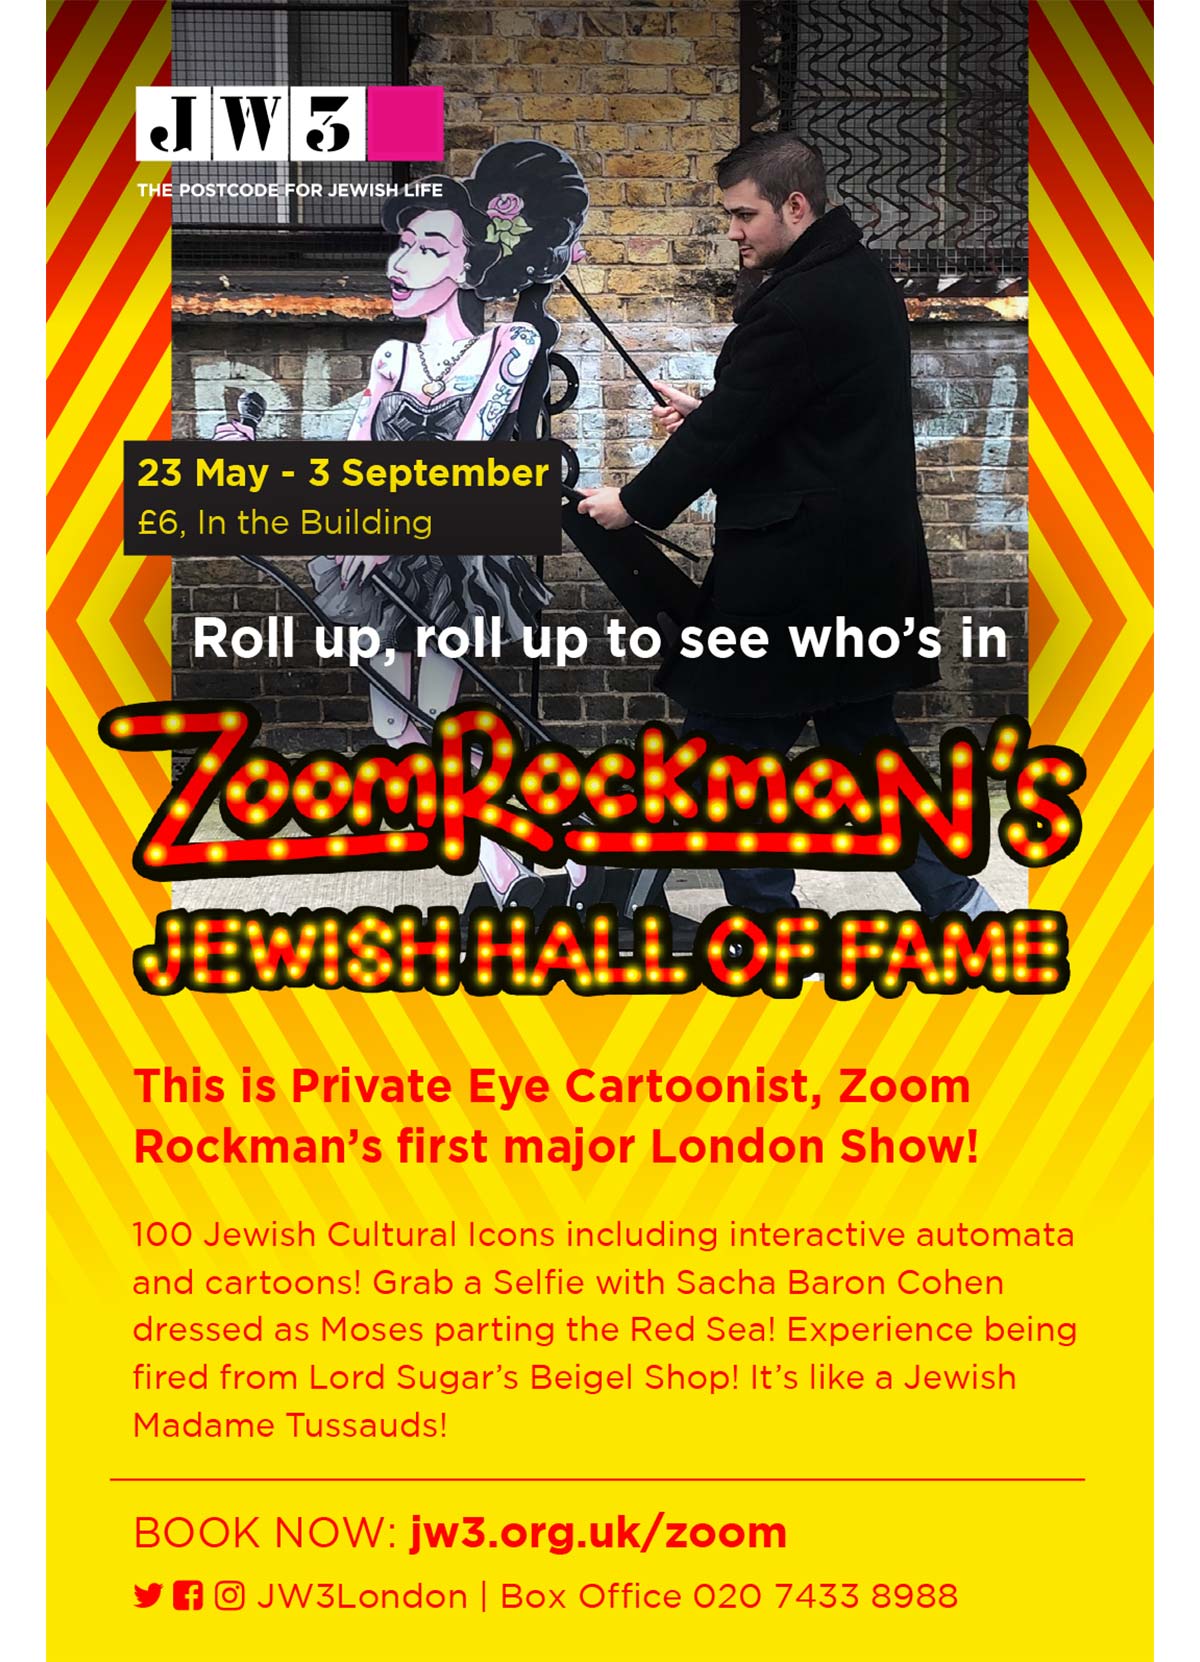 Zoom-Rockman's Jewish Hall of Fame Book now!